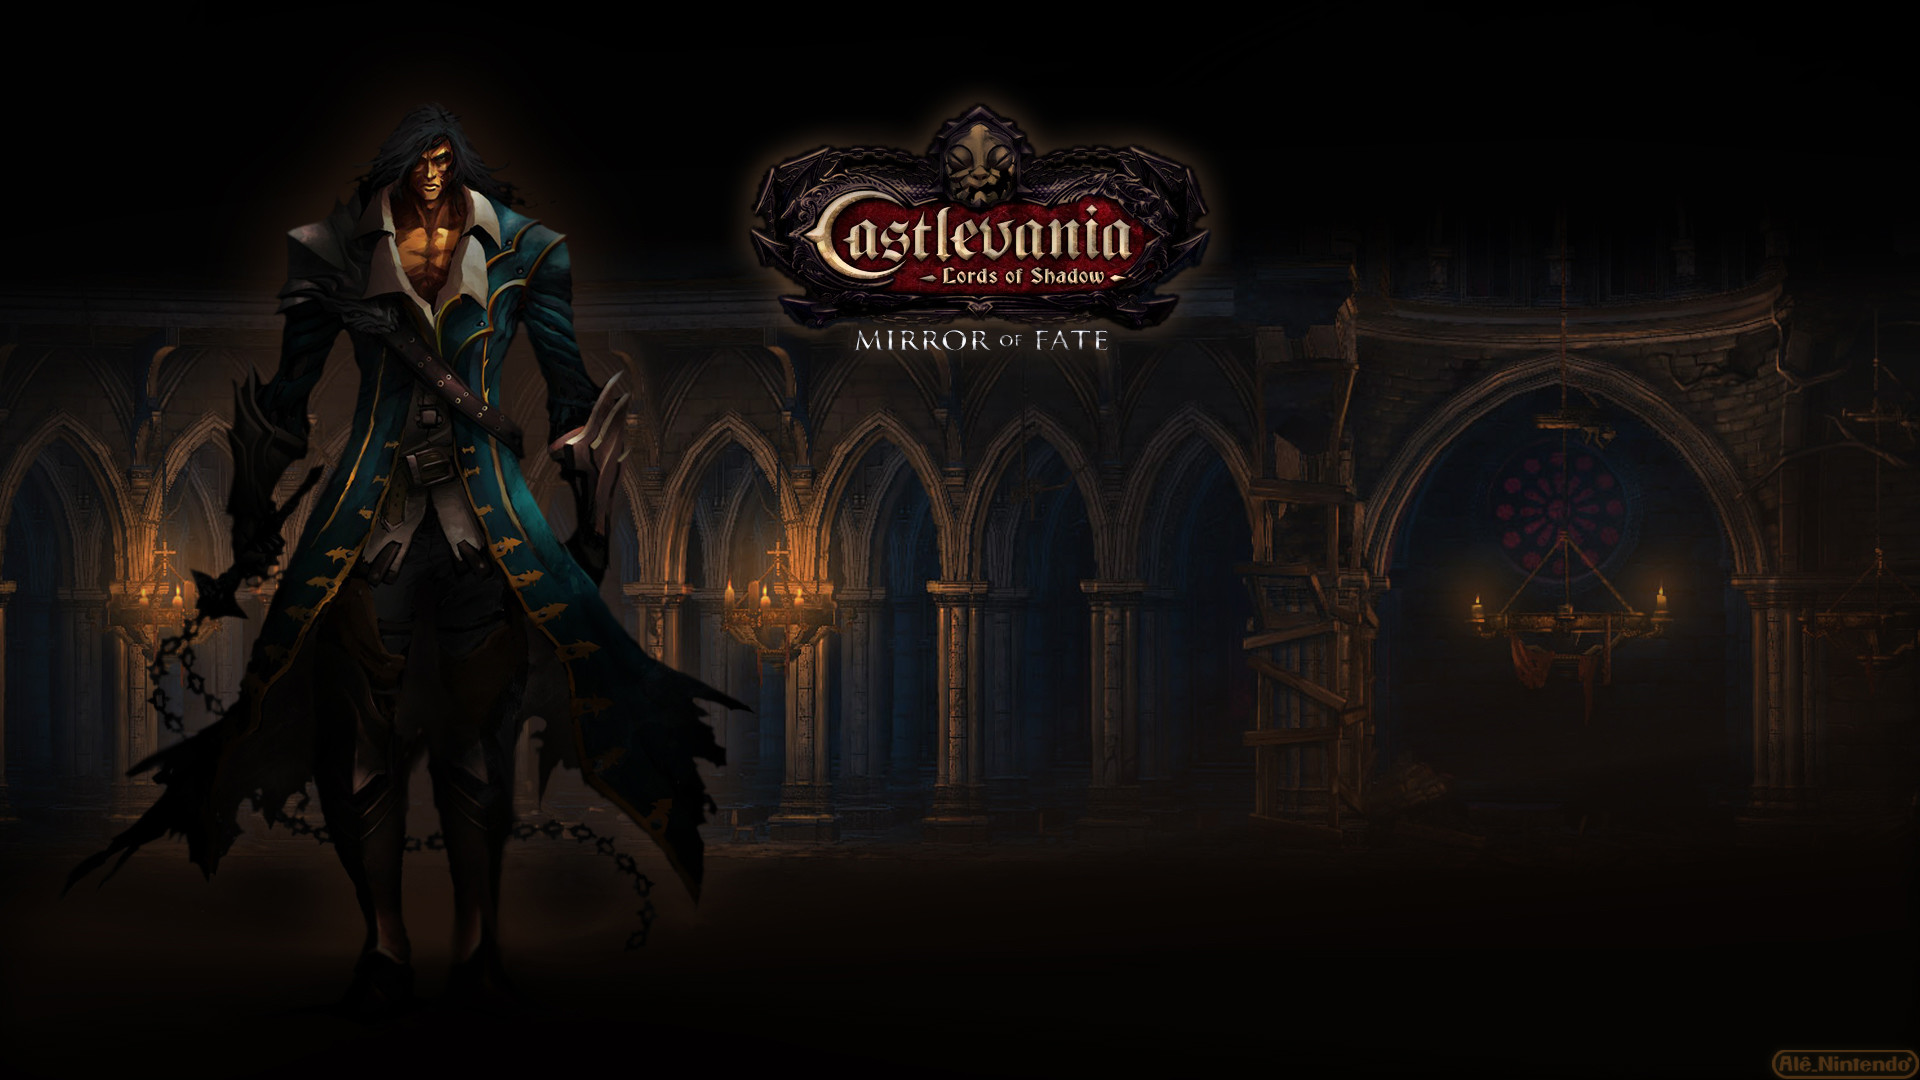 1920x1080 Castlevania: Lords of Shadow - Mirror of Fate Wallpaper